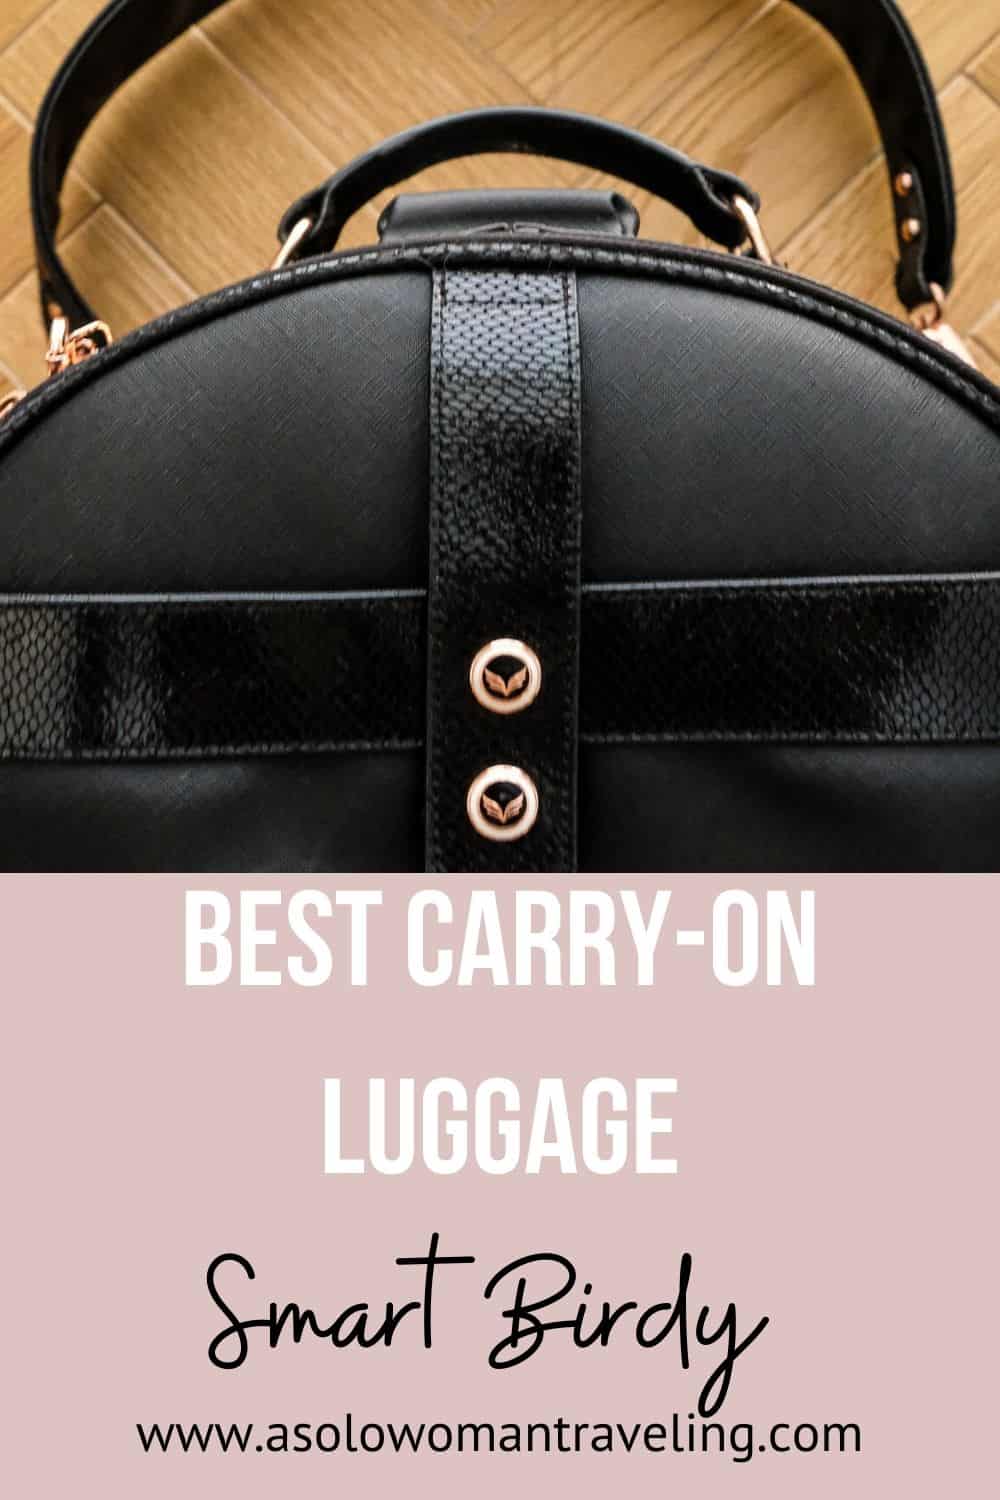 Best carry-on luggage